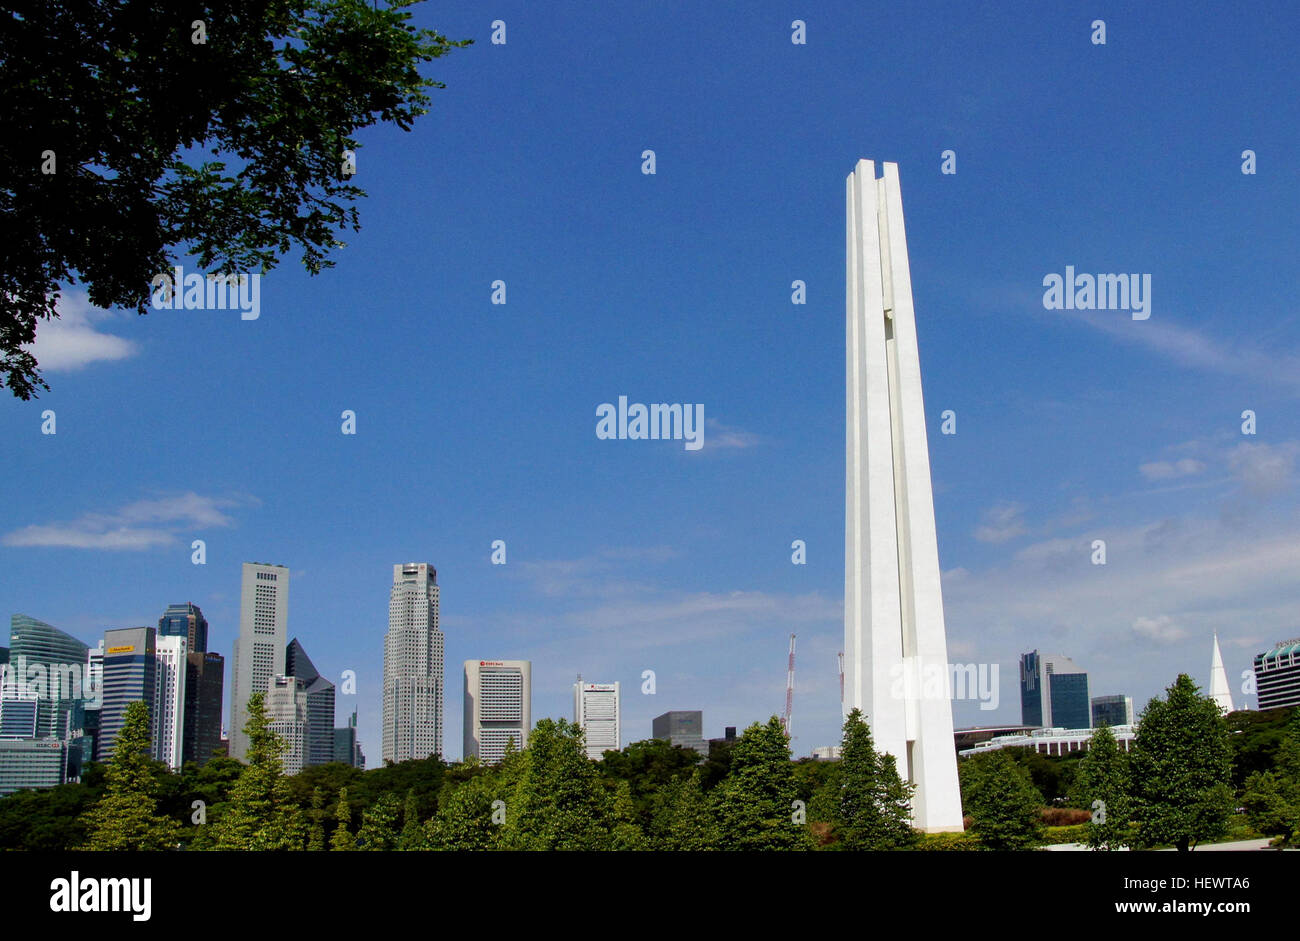 The monument was named the Civilian War Memorial but was affectionately known as the &quot;Chopsticks&quot; memorial with reference to its design. With four pillars each with a height of about 67 metres, the monument resembles two pairs of chopsticks. The design of the four pillars bears a significant meaning - they symbolise the four main races of people living in Singapore. Words were inscribed on the base of the memorial. In four languages, English, Mandarin, Malay and Tamil, the words read: &quot;Memorial to the Civilian Victims of the Japanese Occupation 1942-1945&quot;. Stock Photo